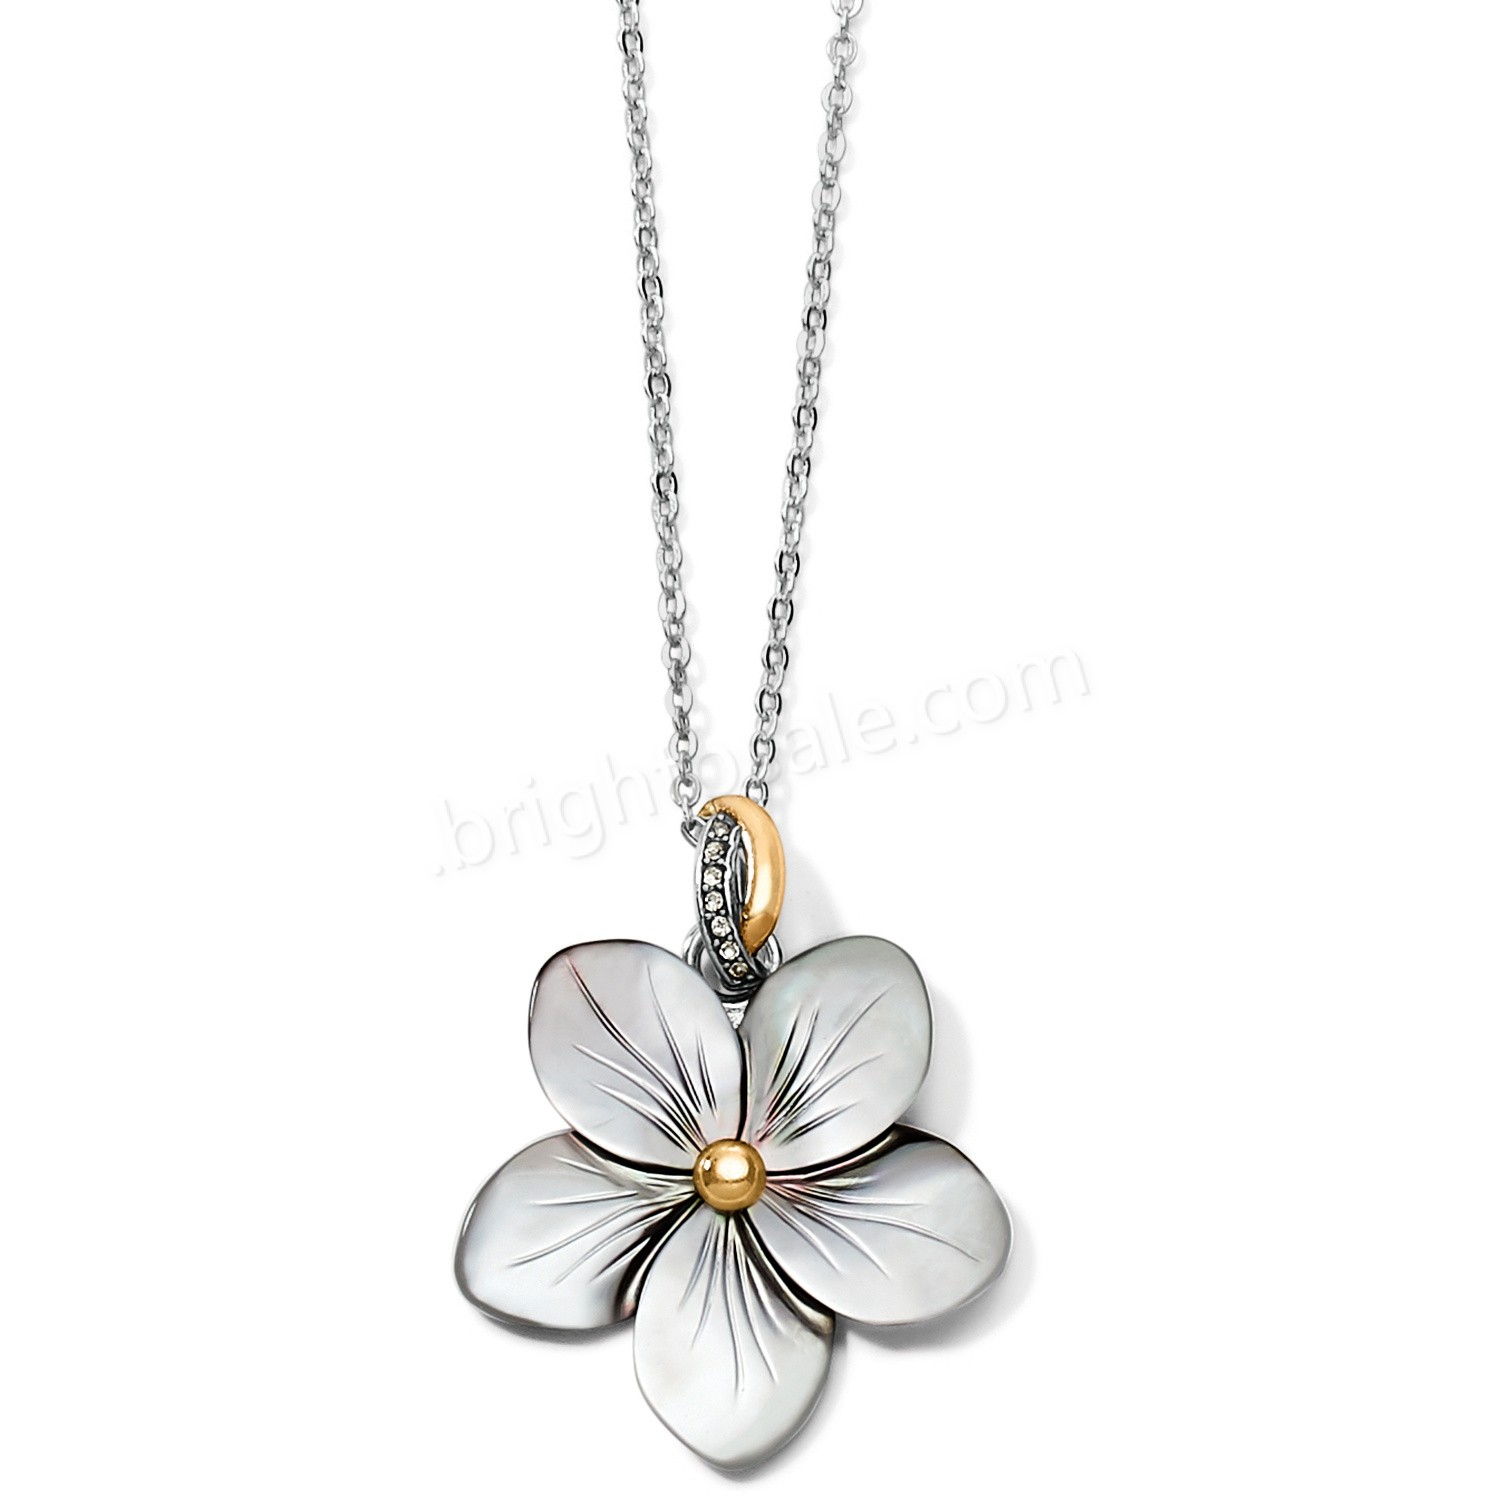 Brighton Collectibles & Online Discount Neptune's Rings Shell Flower Necklace - Brighton Collectibles & Online Discount Neptune's Rings Shell Flower Necklace